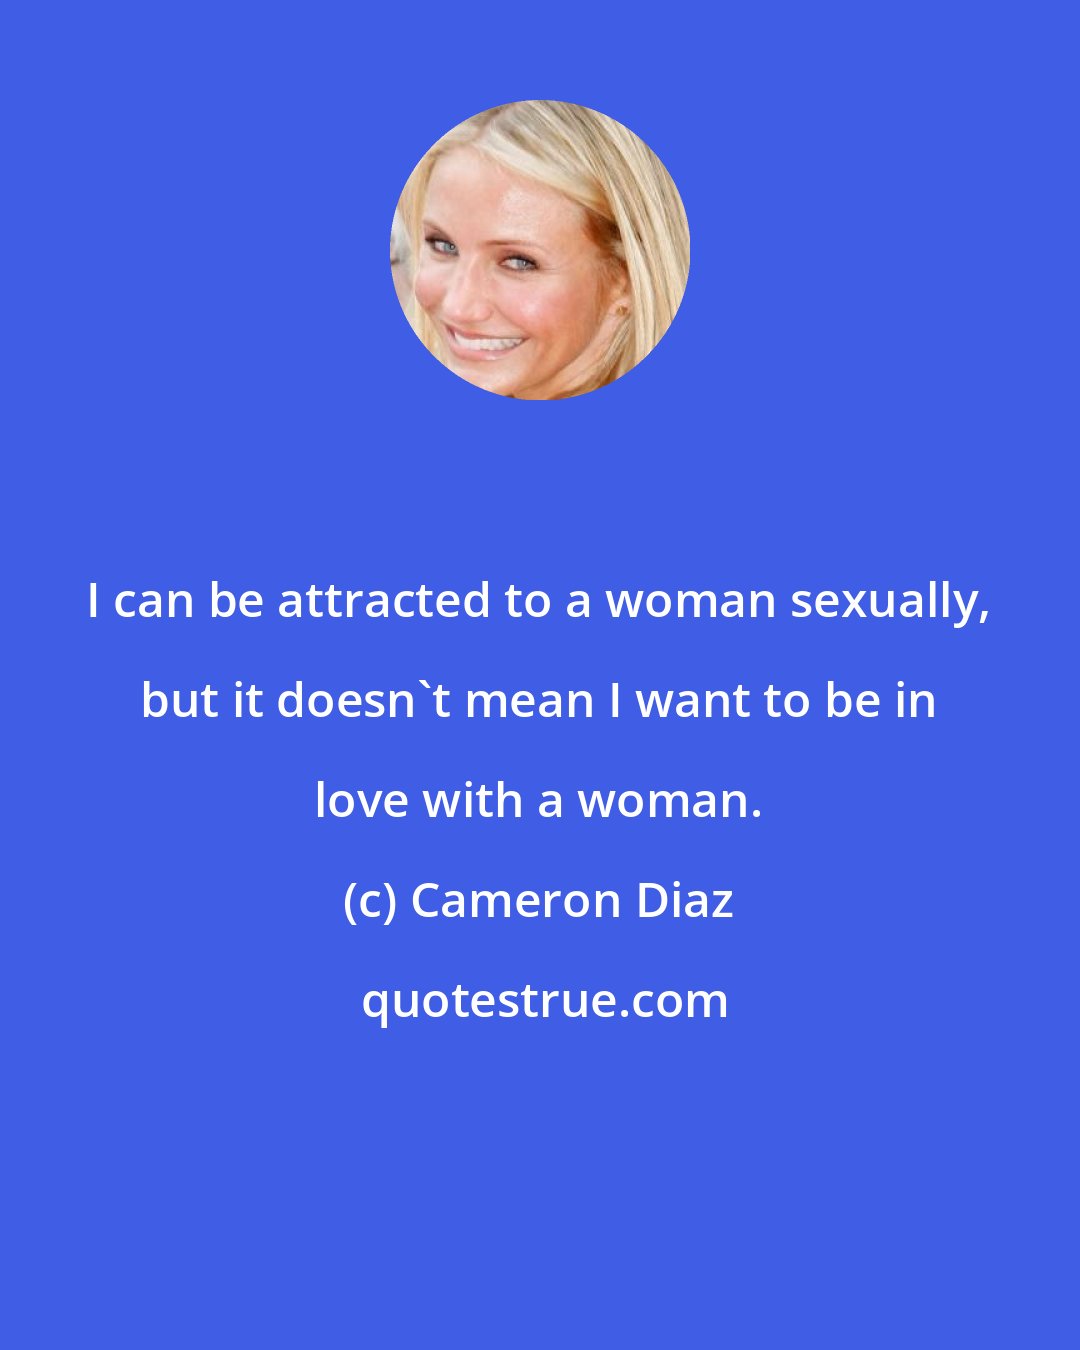 Cameron Diaz: I can be attracted to a woman sexually, but it doesn't mean I want to be in love with a woman.